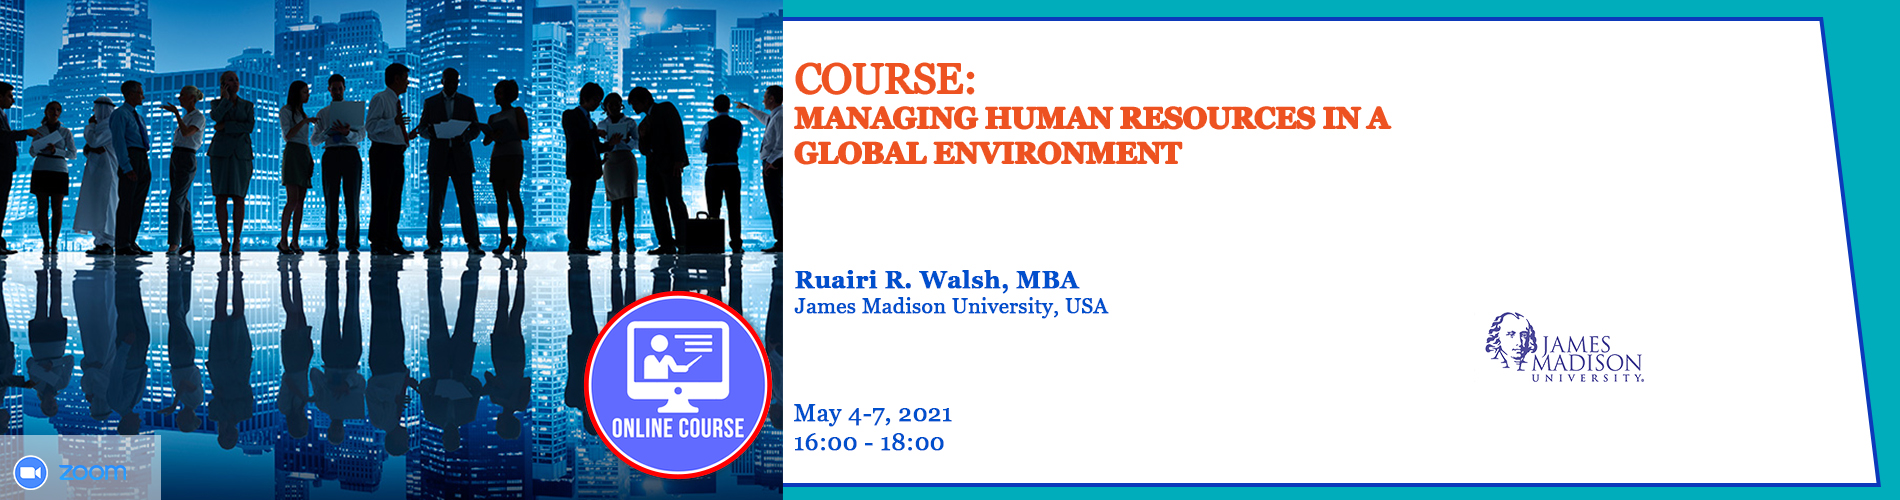 2021.05.04-05.07 Managing Human Resources in a Global Environment